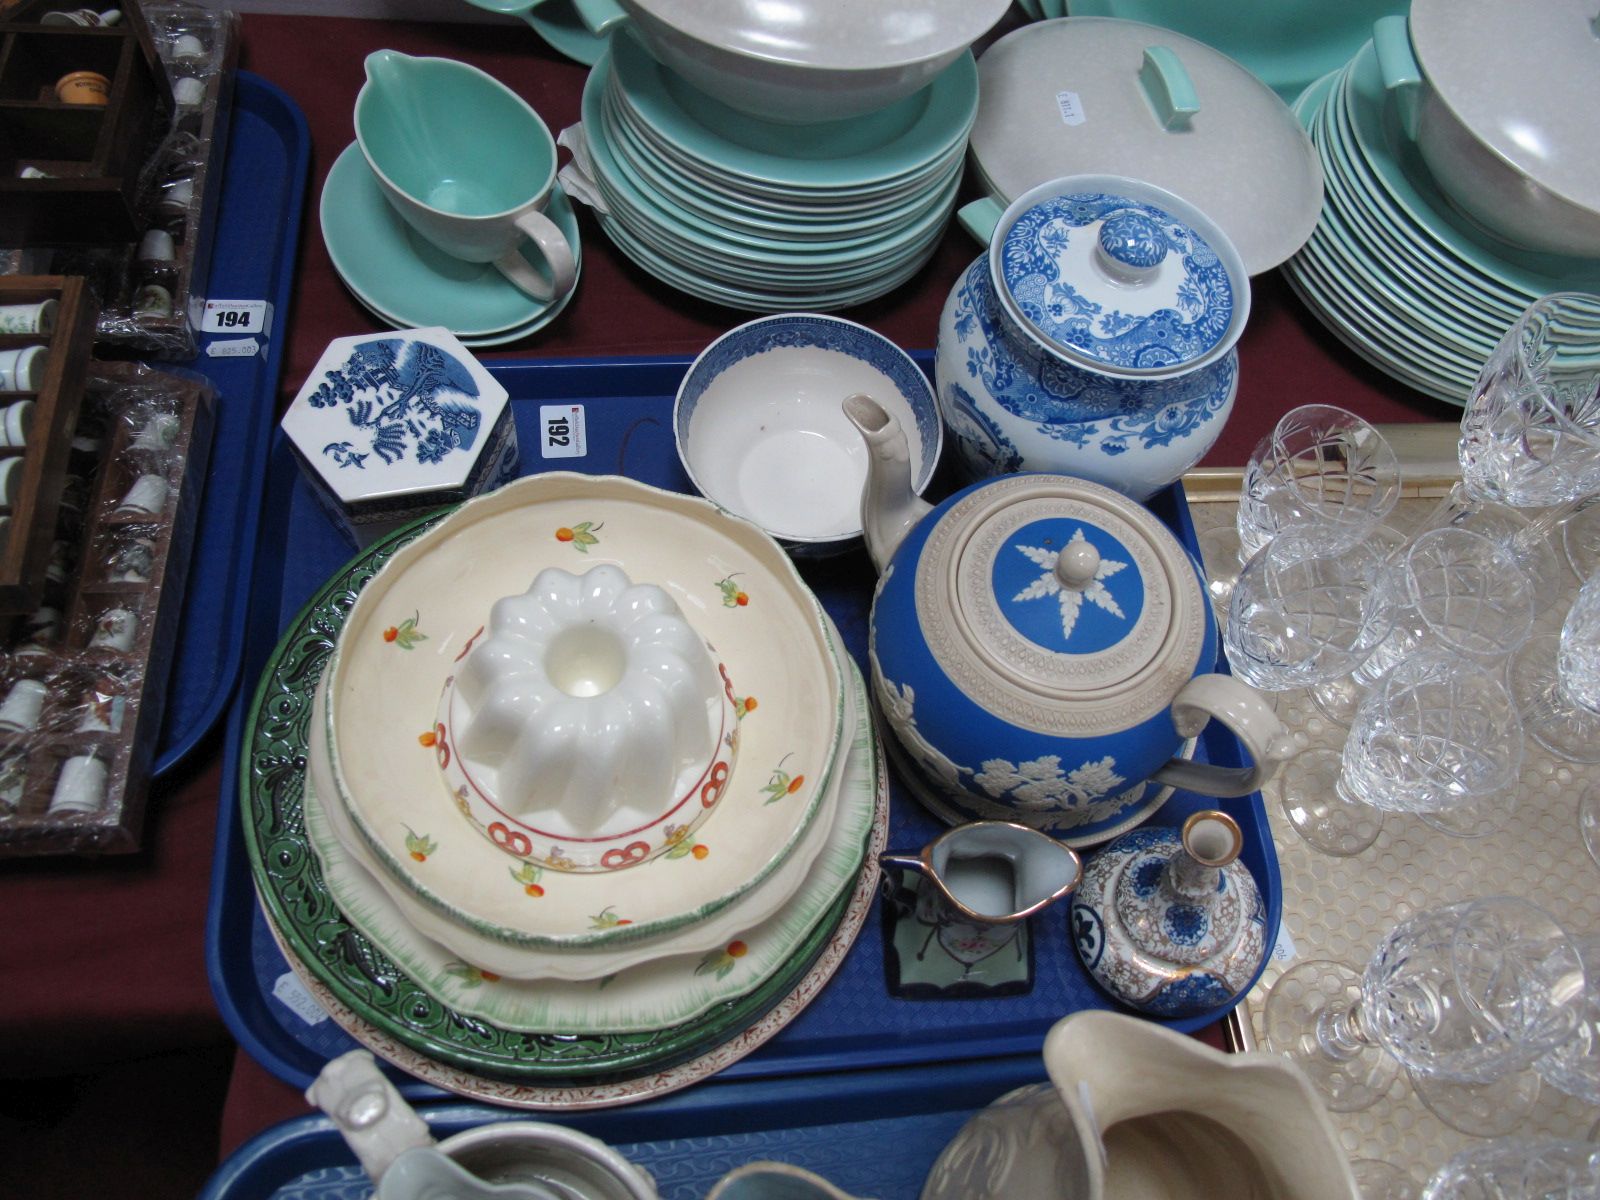 Ducal Salad Drainer, jelly mould, Spode biscuit jar, Booths hexagonal trinket, Copeland teapot on